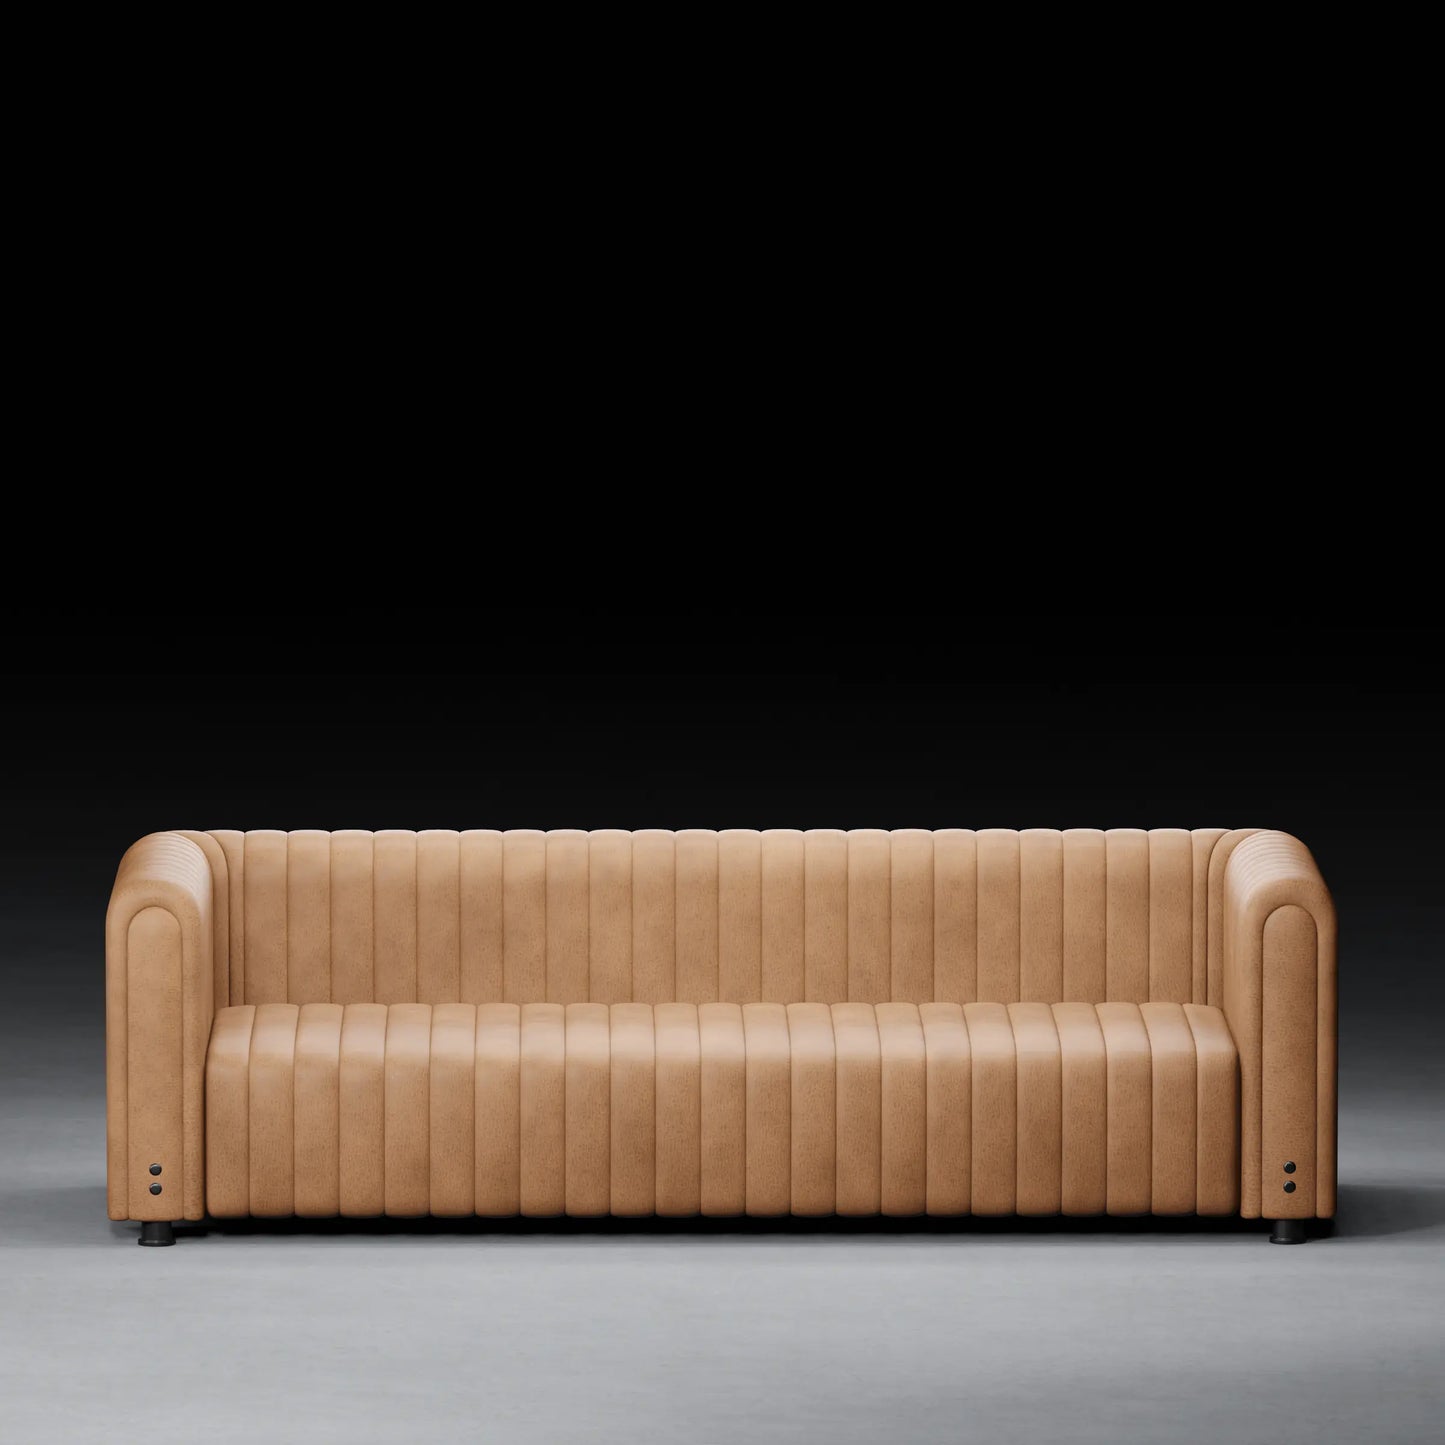 FIG  - XL 3 Seater Couch in Leather Finish | Tan Color